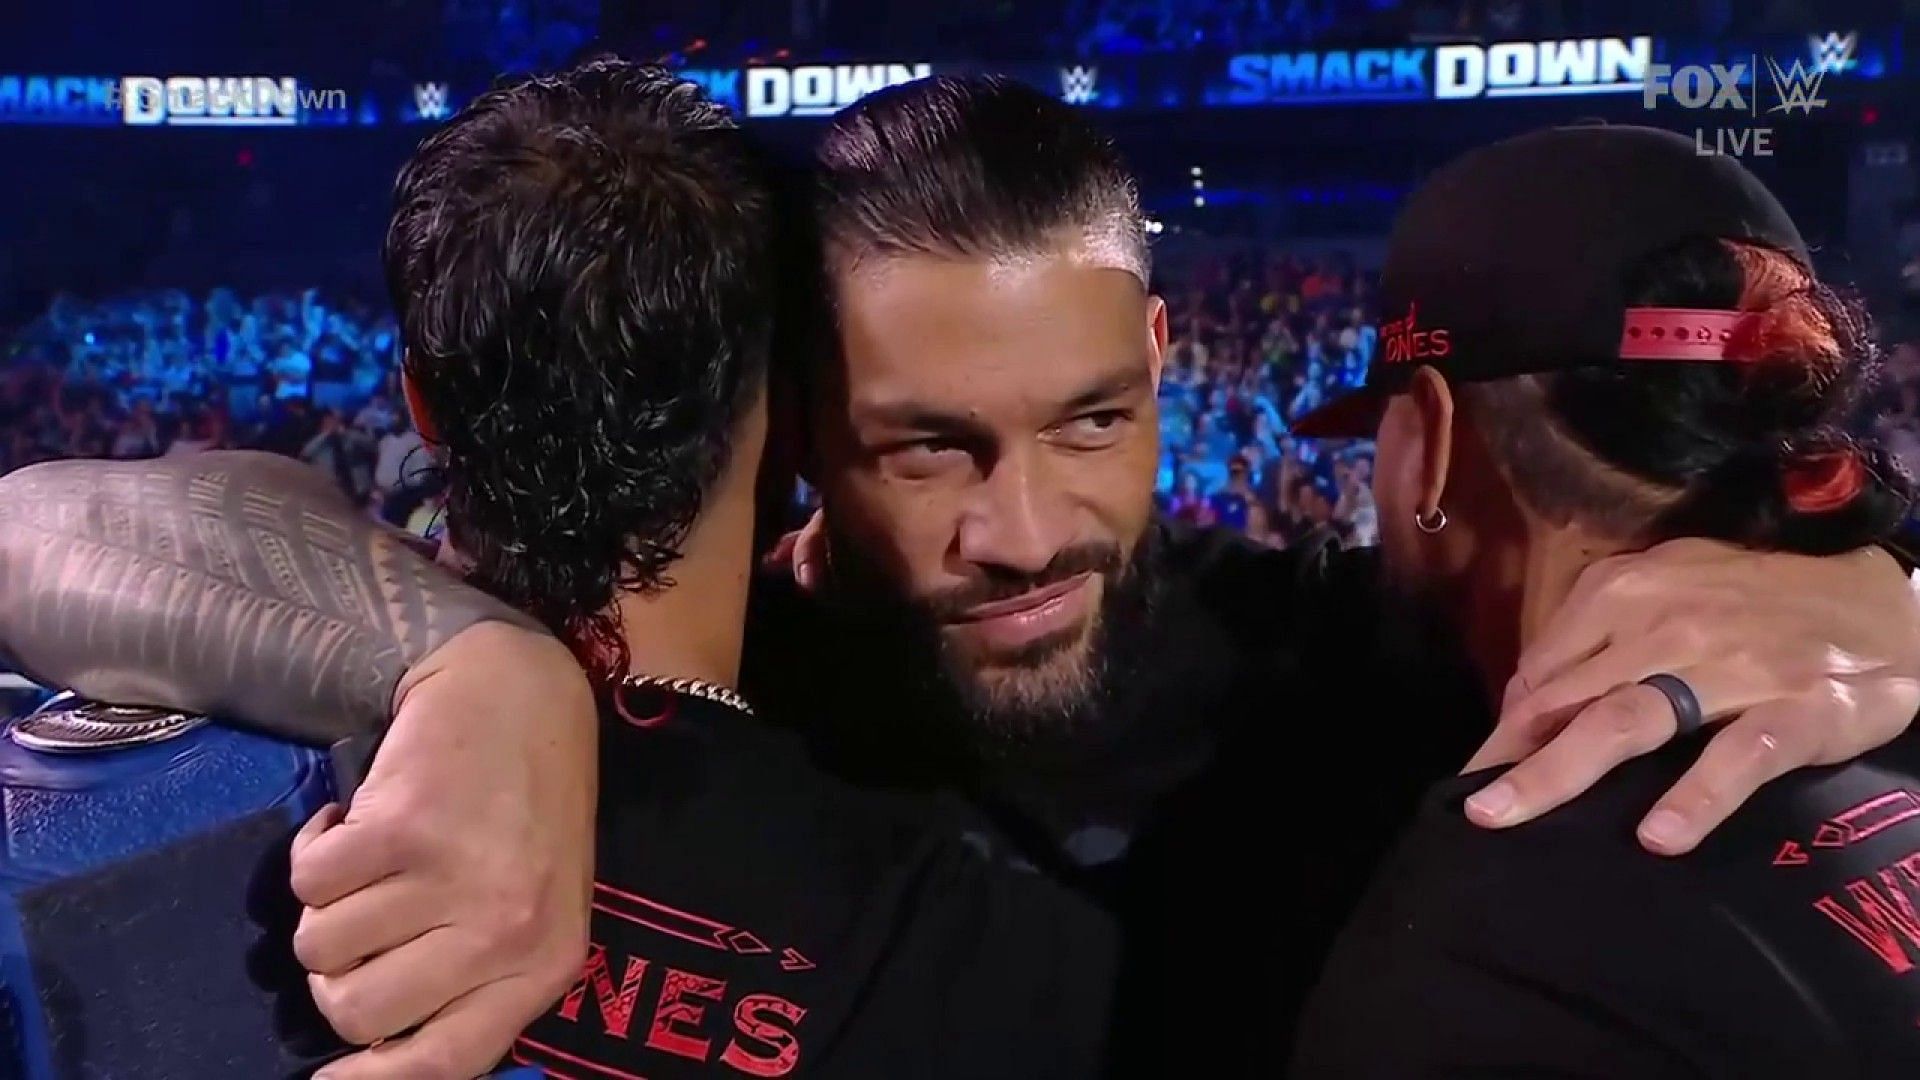 Roman Reigns embracing The Usos on SmackDown